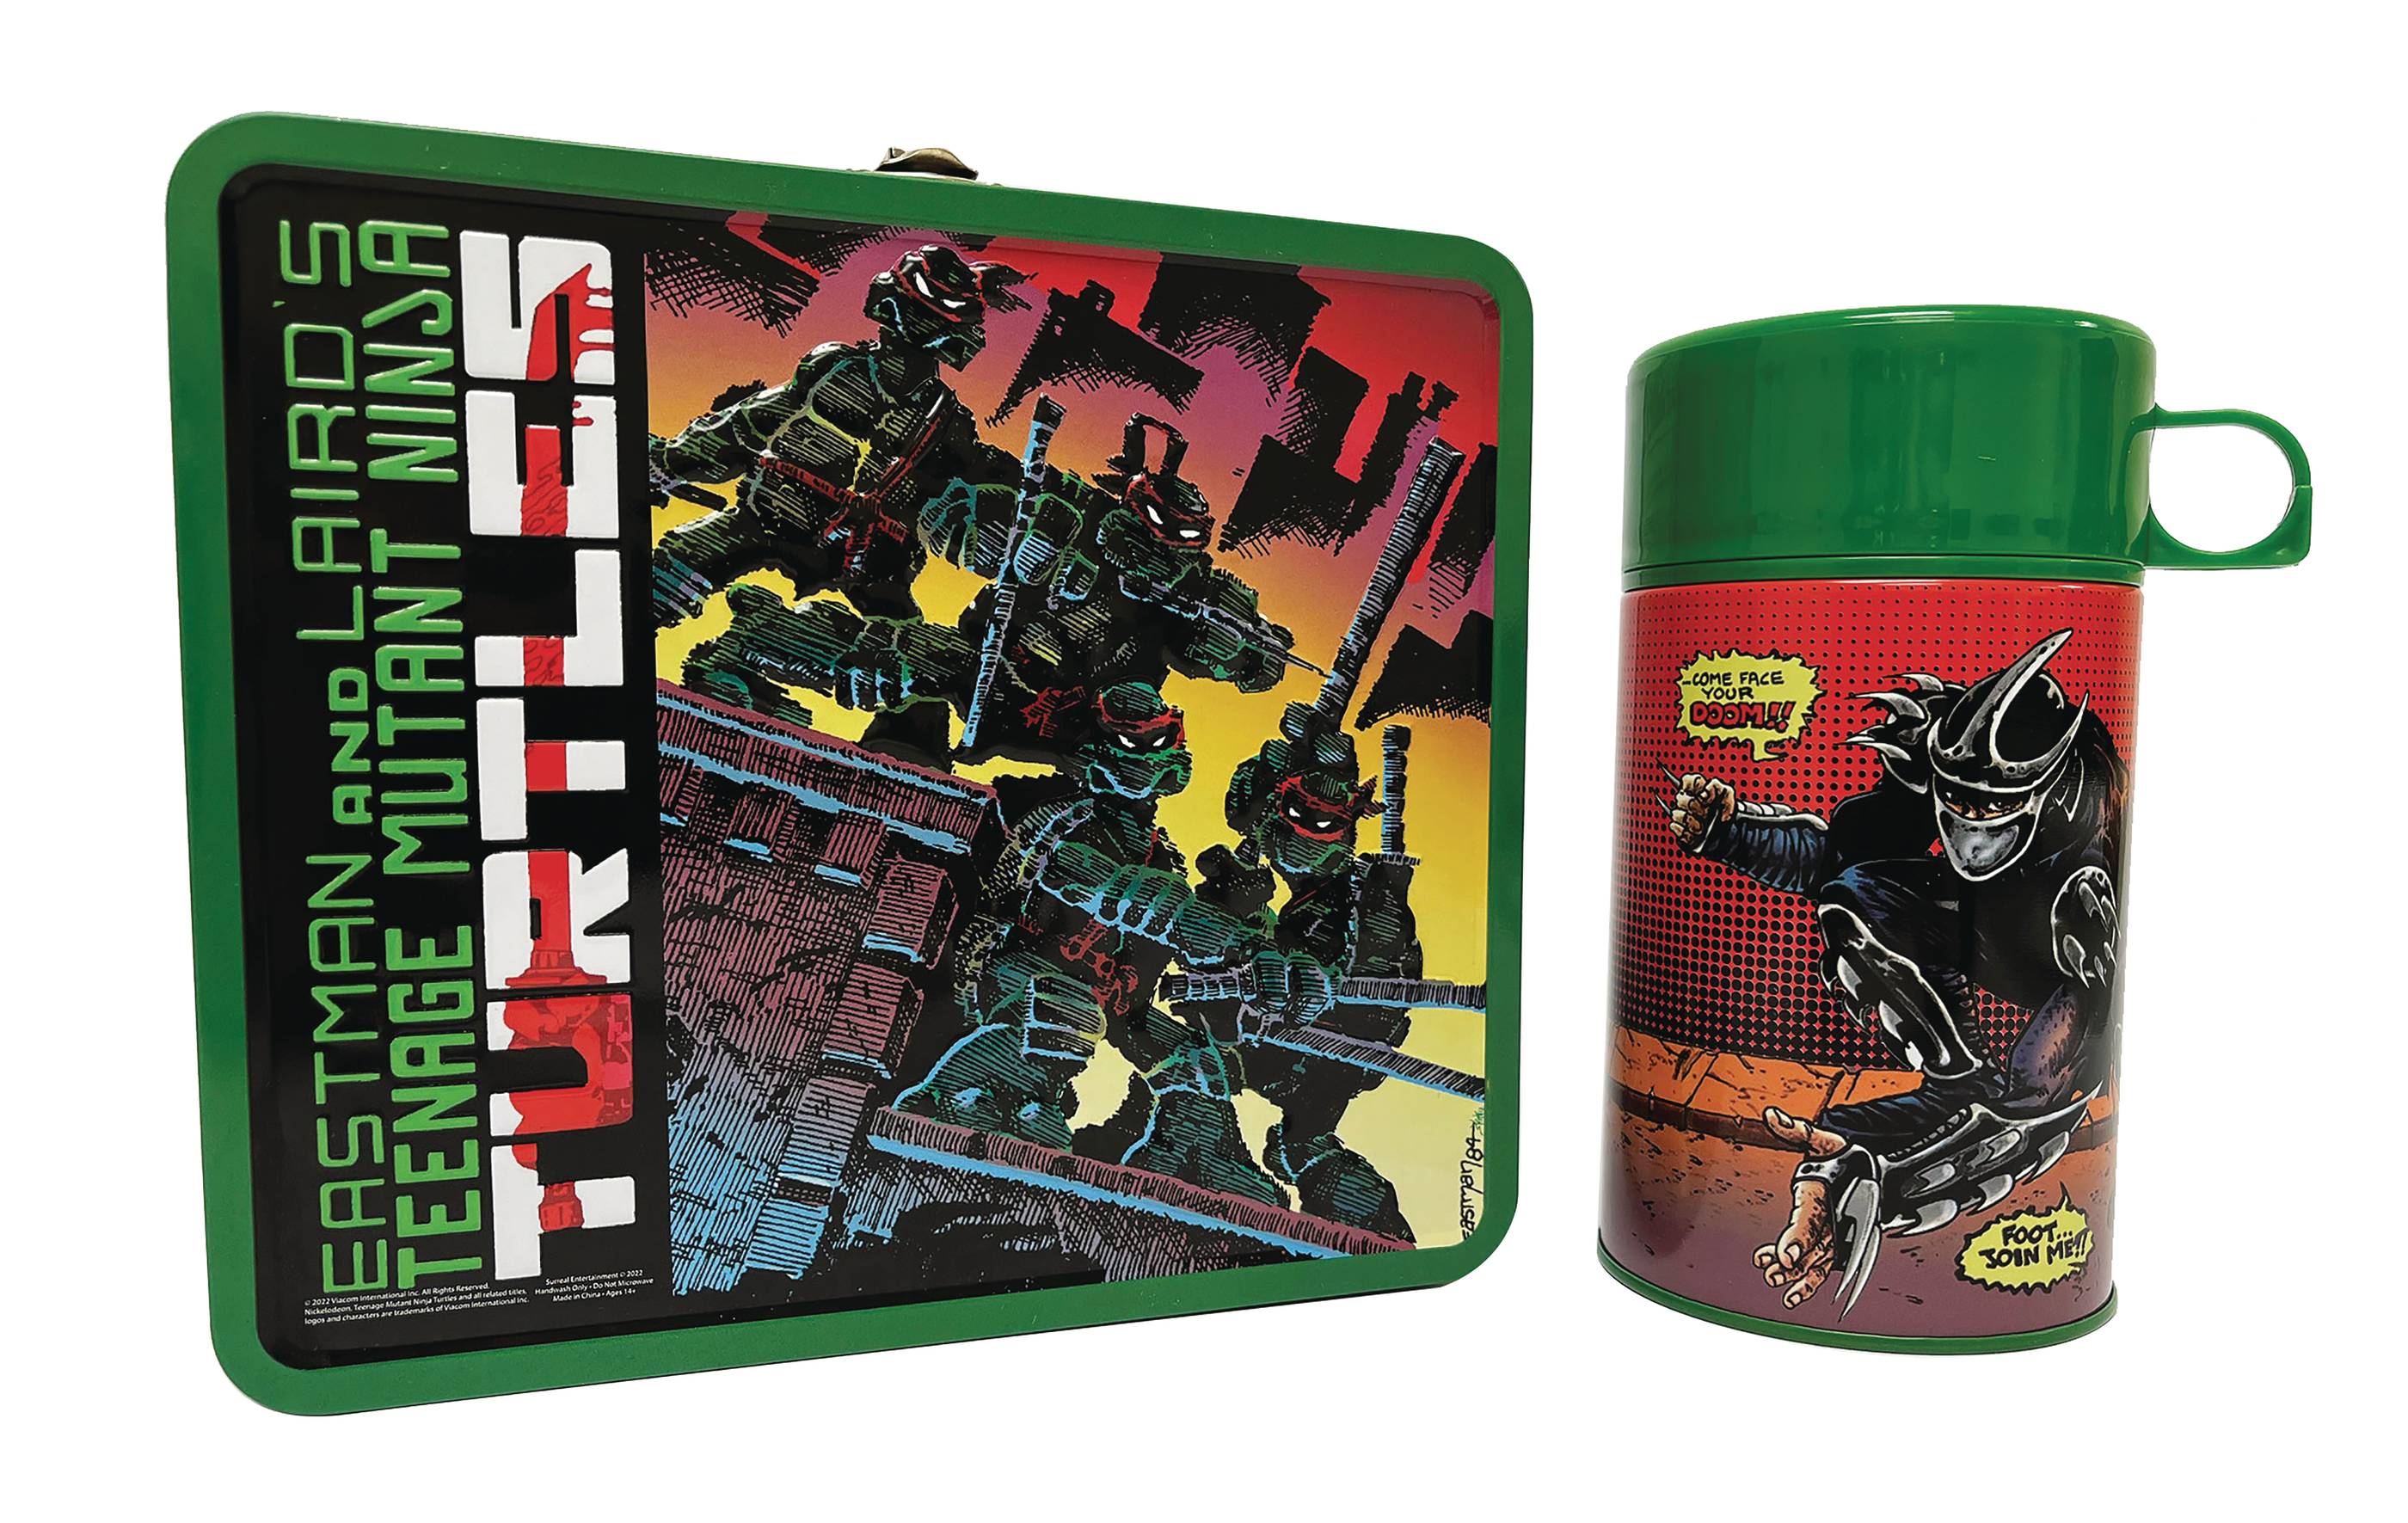 TIN TITANS TMNT CLASSIC COMIC #1 PX LUNCHBOX & BEV CONTAINER